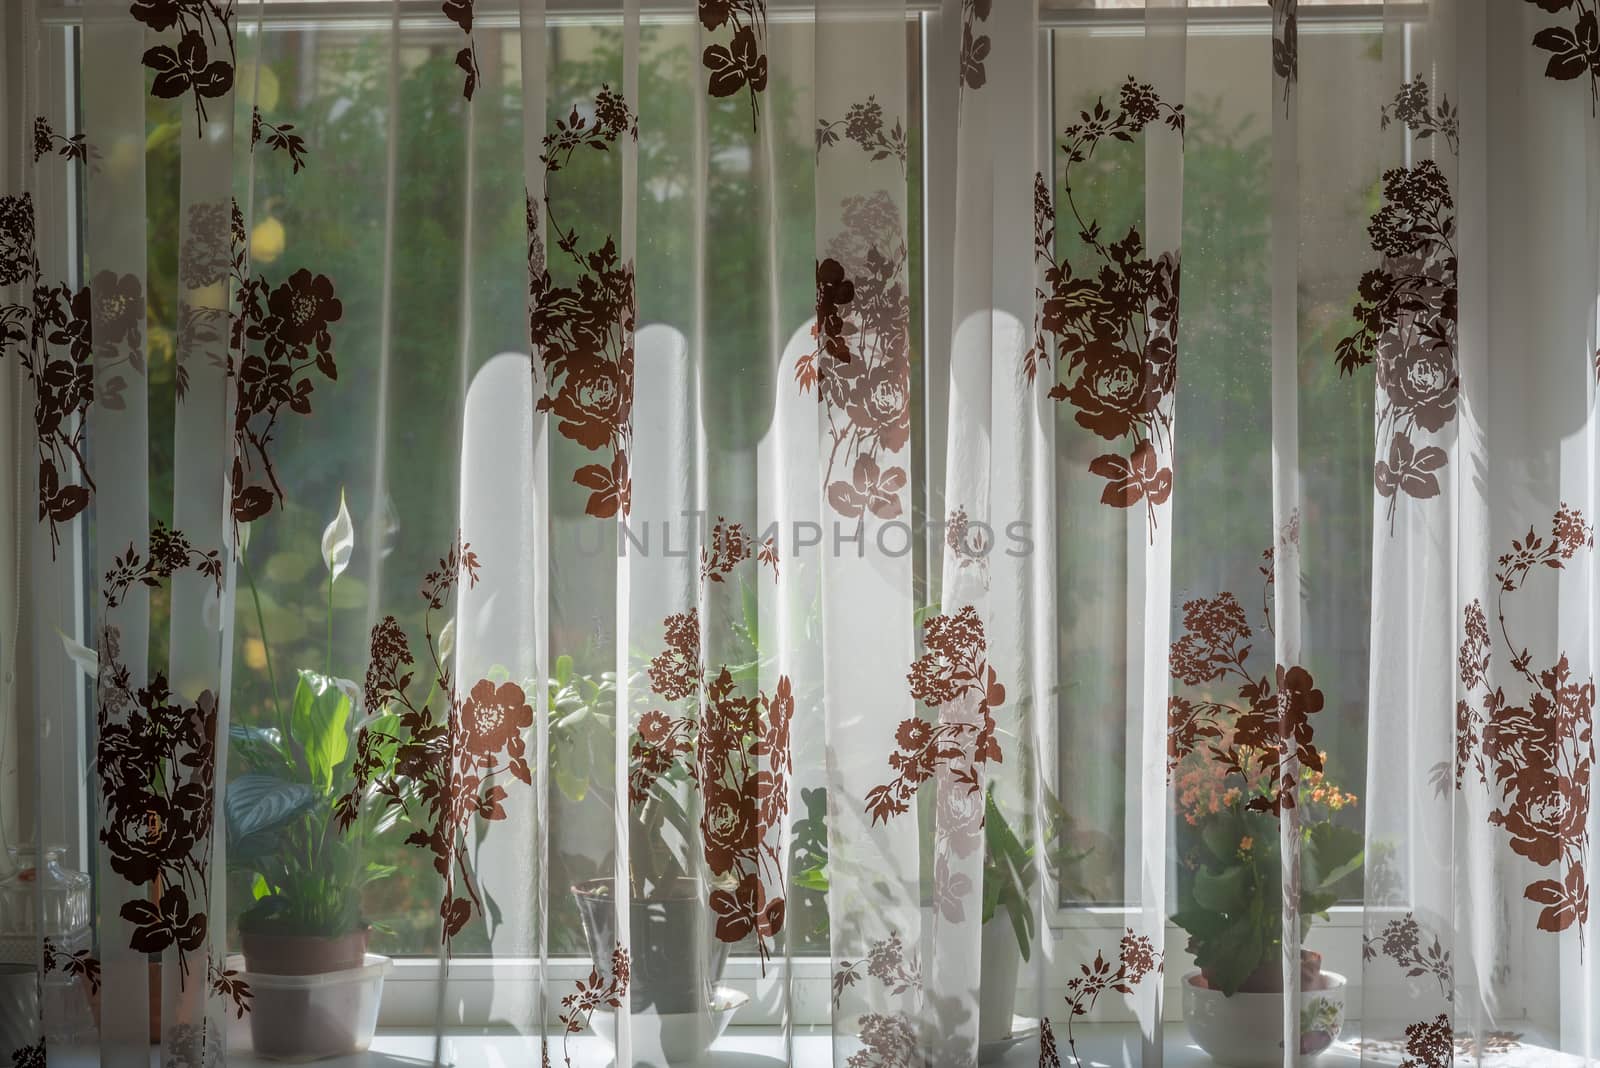 Curtain covers window and windowsill with flowers at noon Noon sunshine.